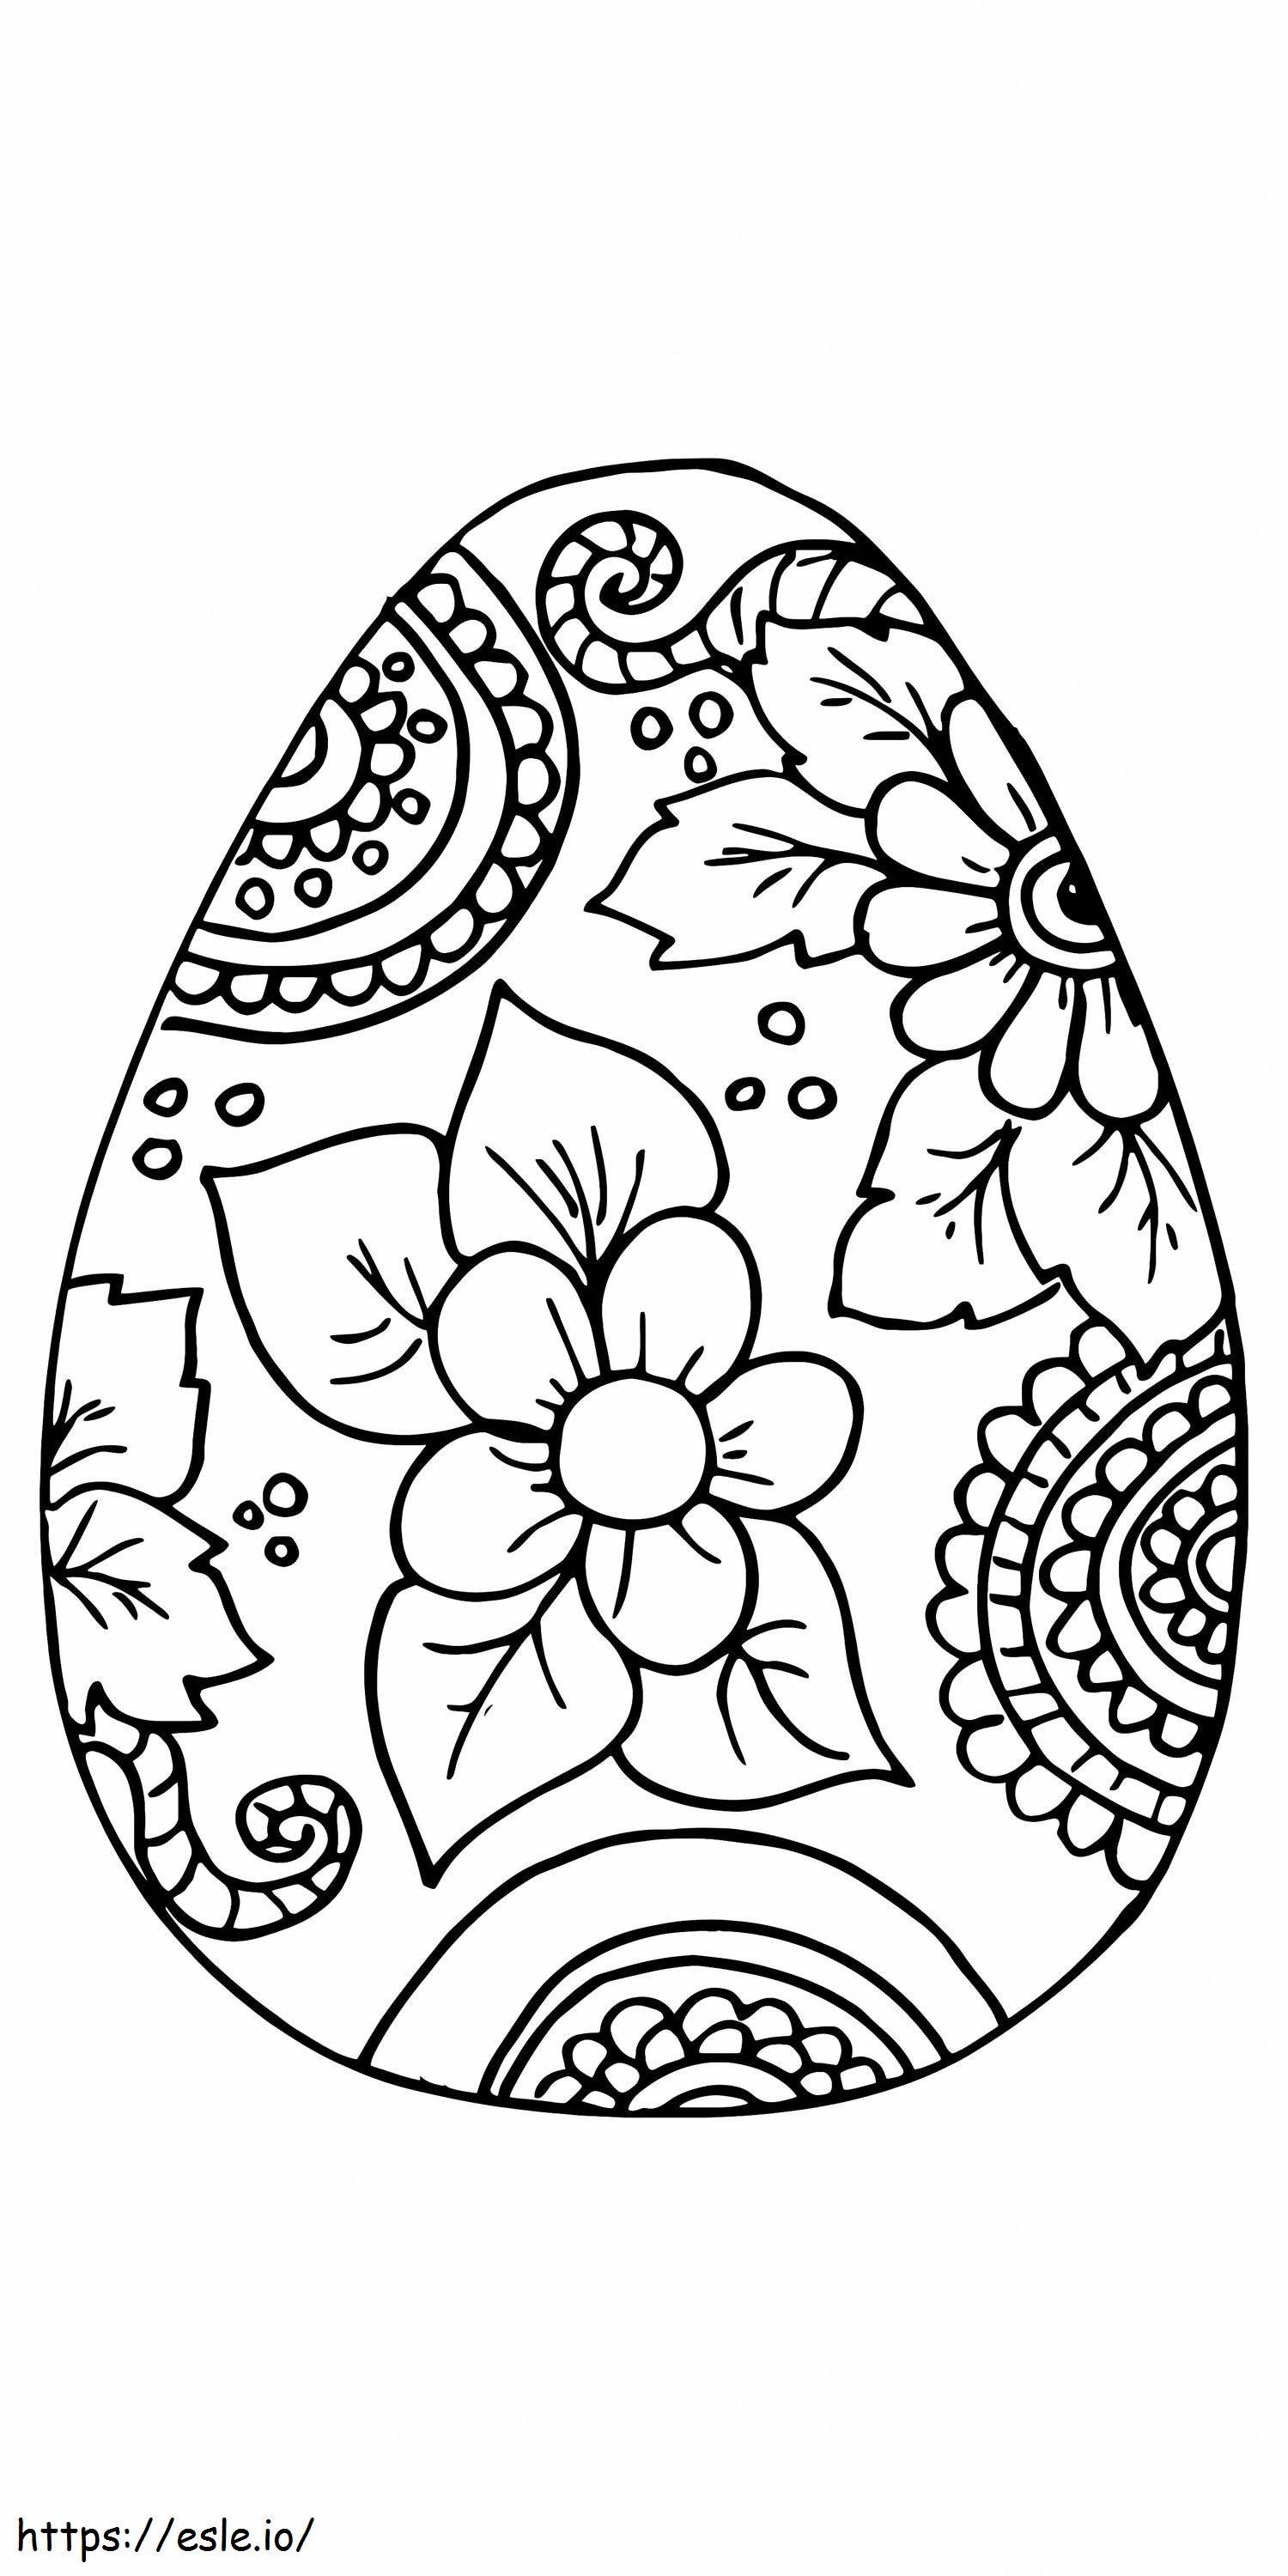 Easter Egg Flower Patterns Printable 2 coloring page